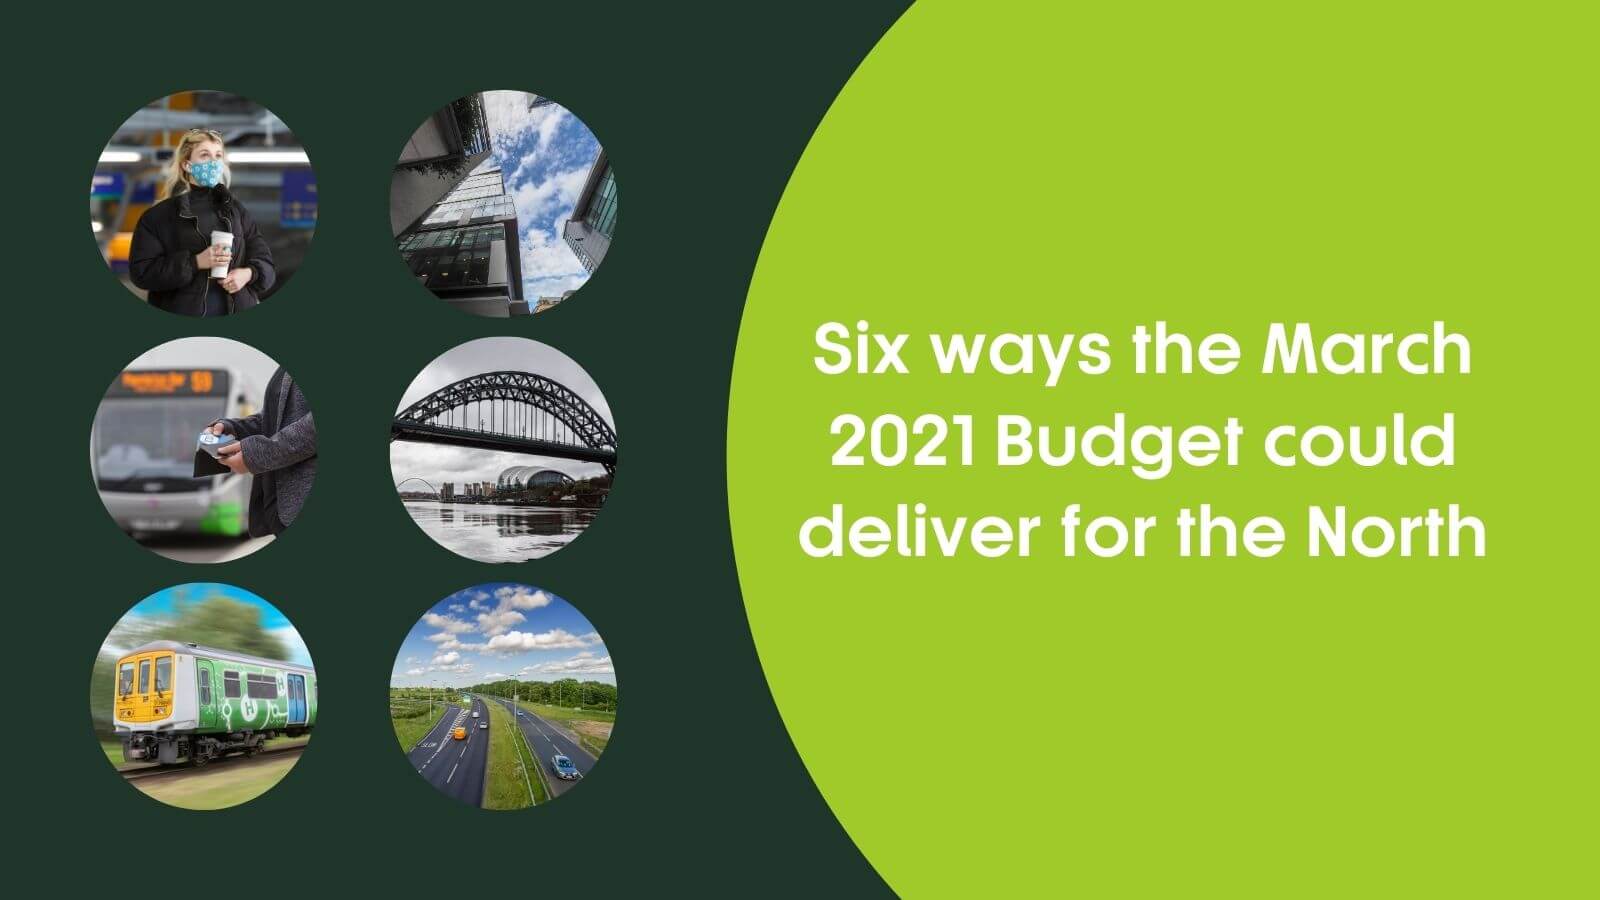 Six ways the March 2021 Budget could deliver for the North